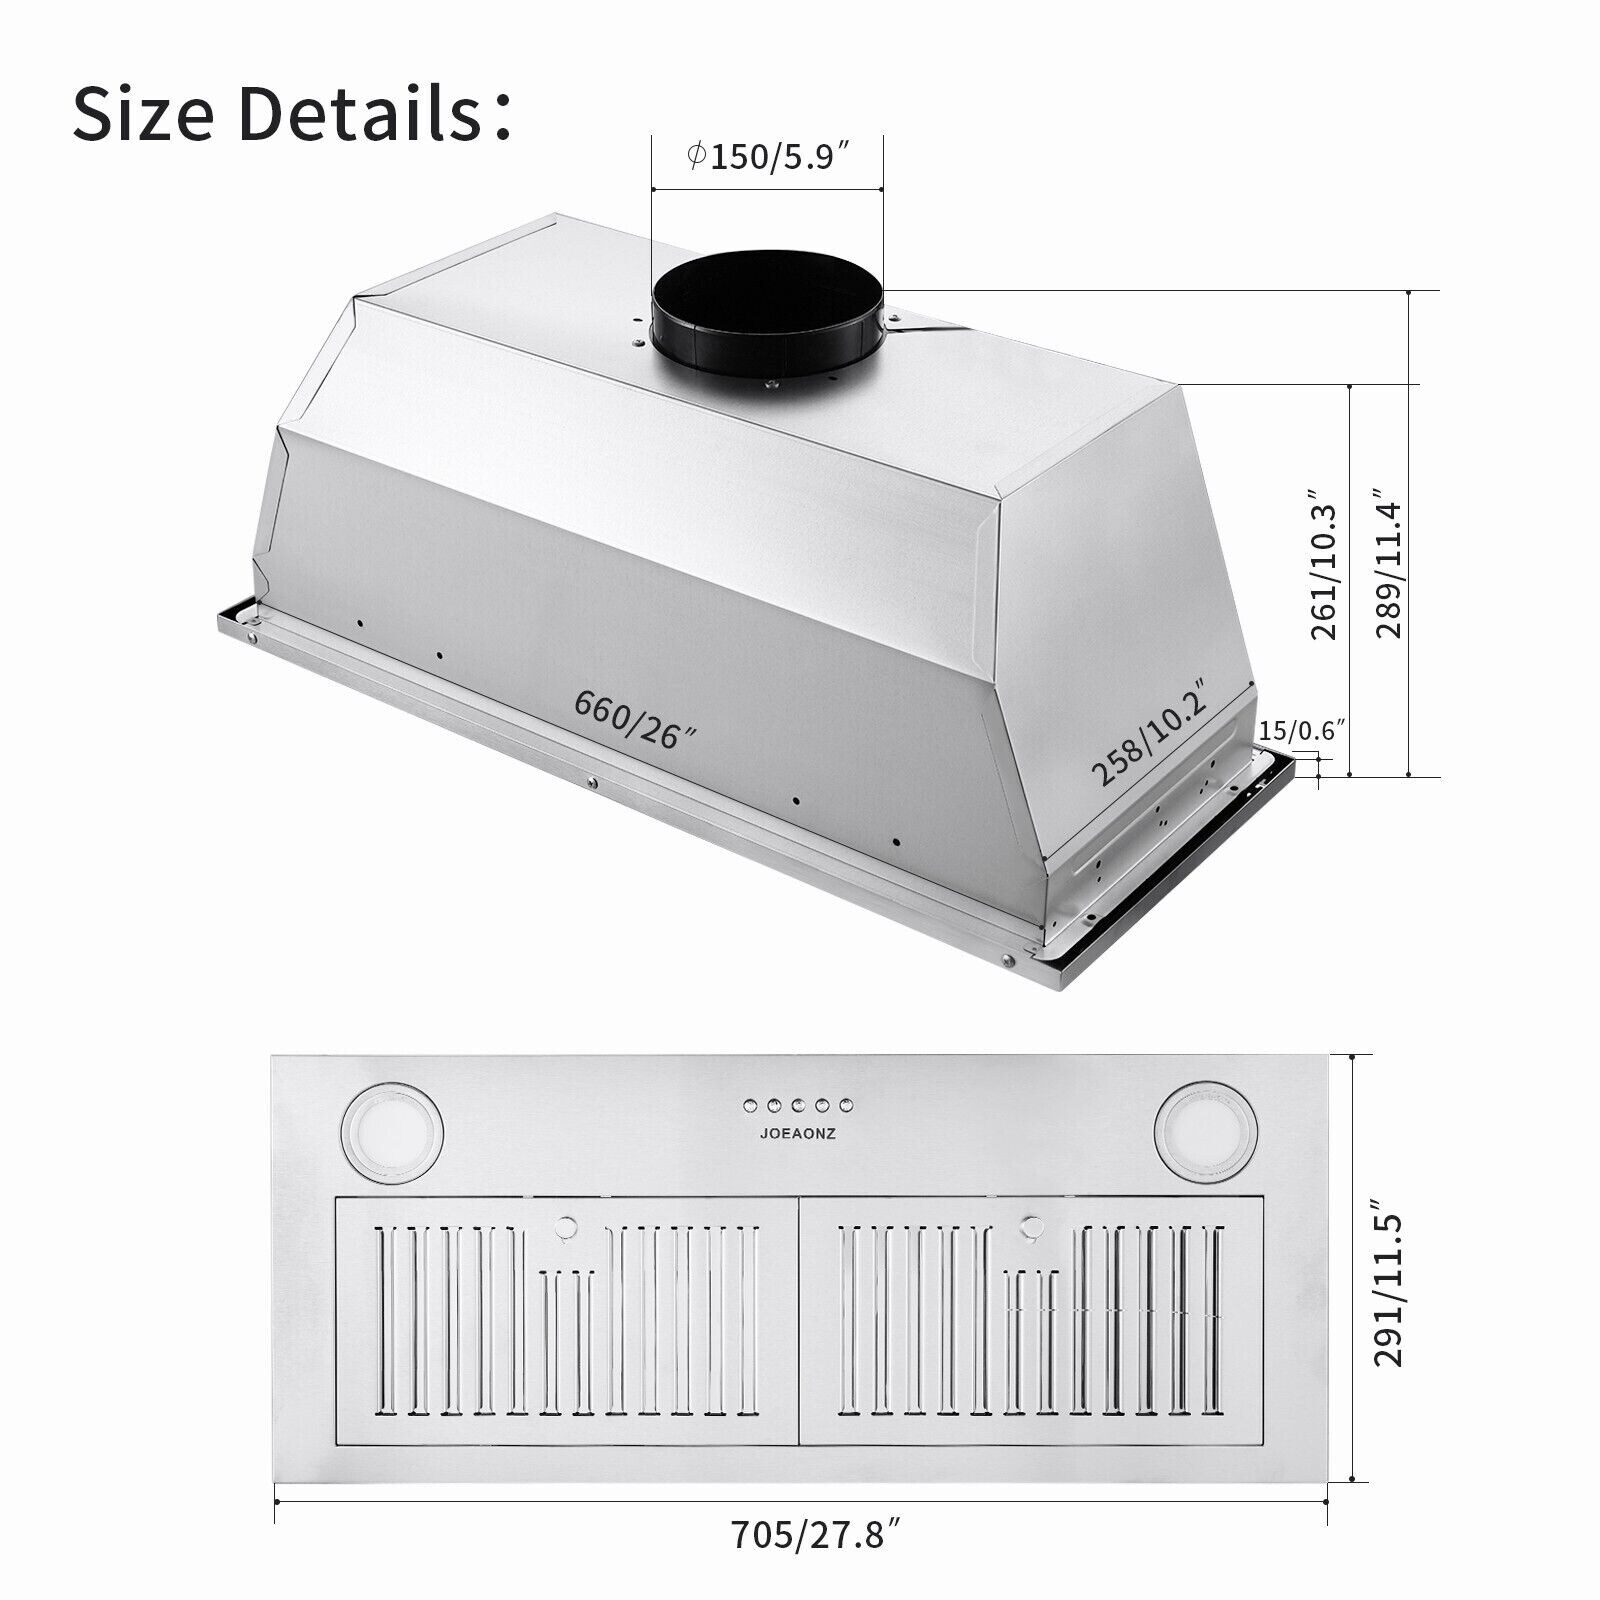 Tieasy Range Hood Insert 30 inch, 600 CFM Large Air-Flow Capacity Stainless Steel Built-In Vent Hood with Matel Covered Motor, Ducted/Ductless